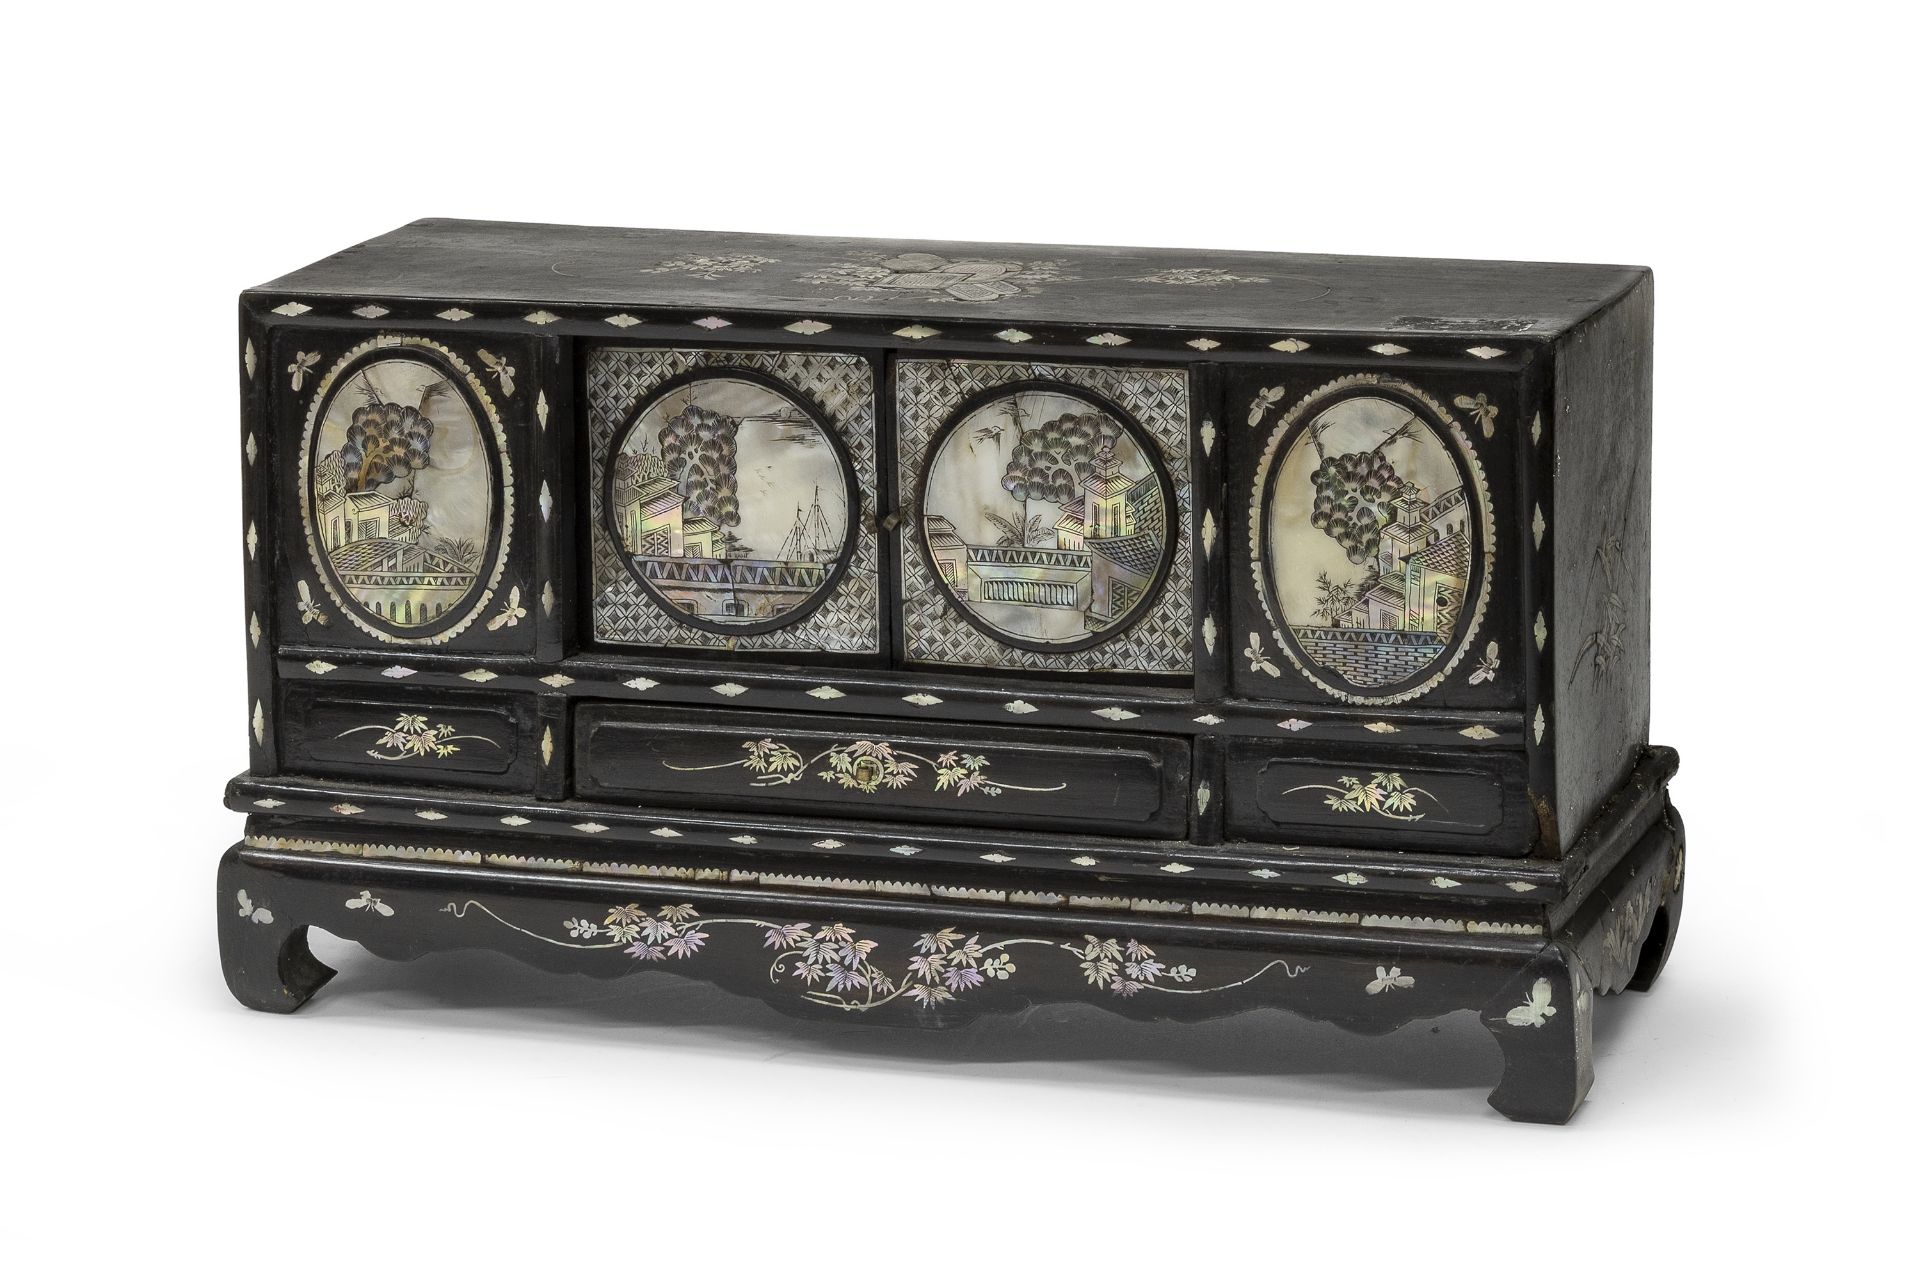 A BLACK LACQUER MODEL OF A DRESSER WITH MOTHER-OF-PEARL INLAYS CHINA 20TH CENTURY